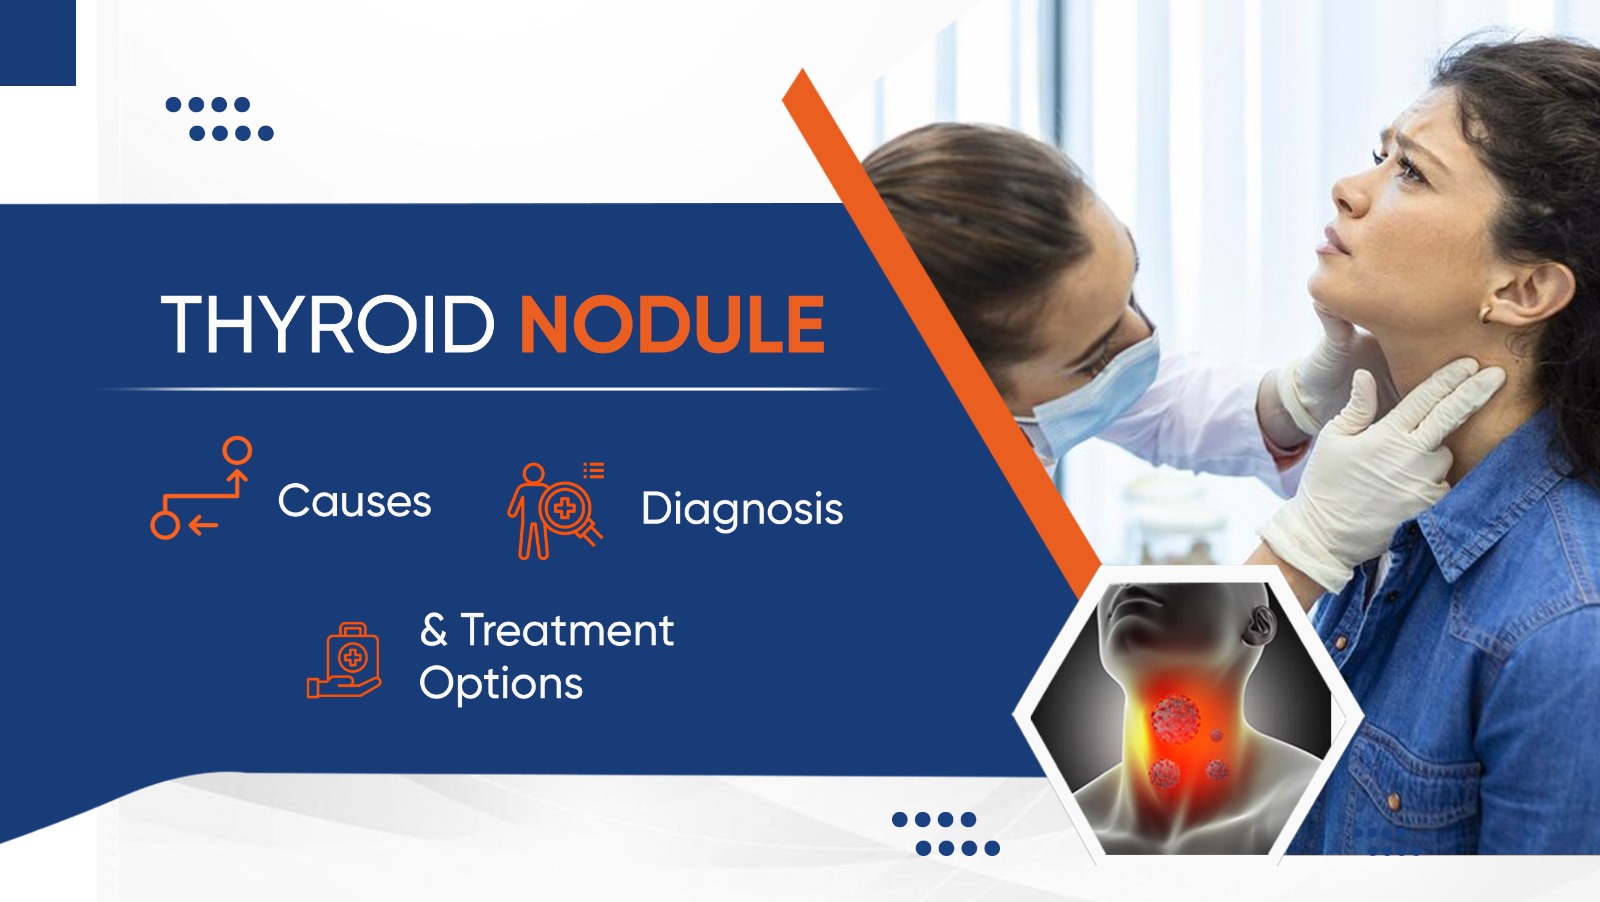 Thyroid Nodule: Causes, Diagnosis and treatment options